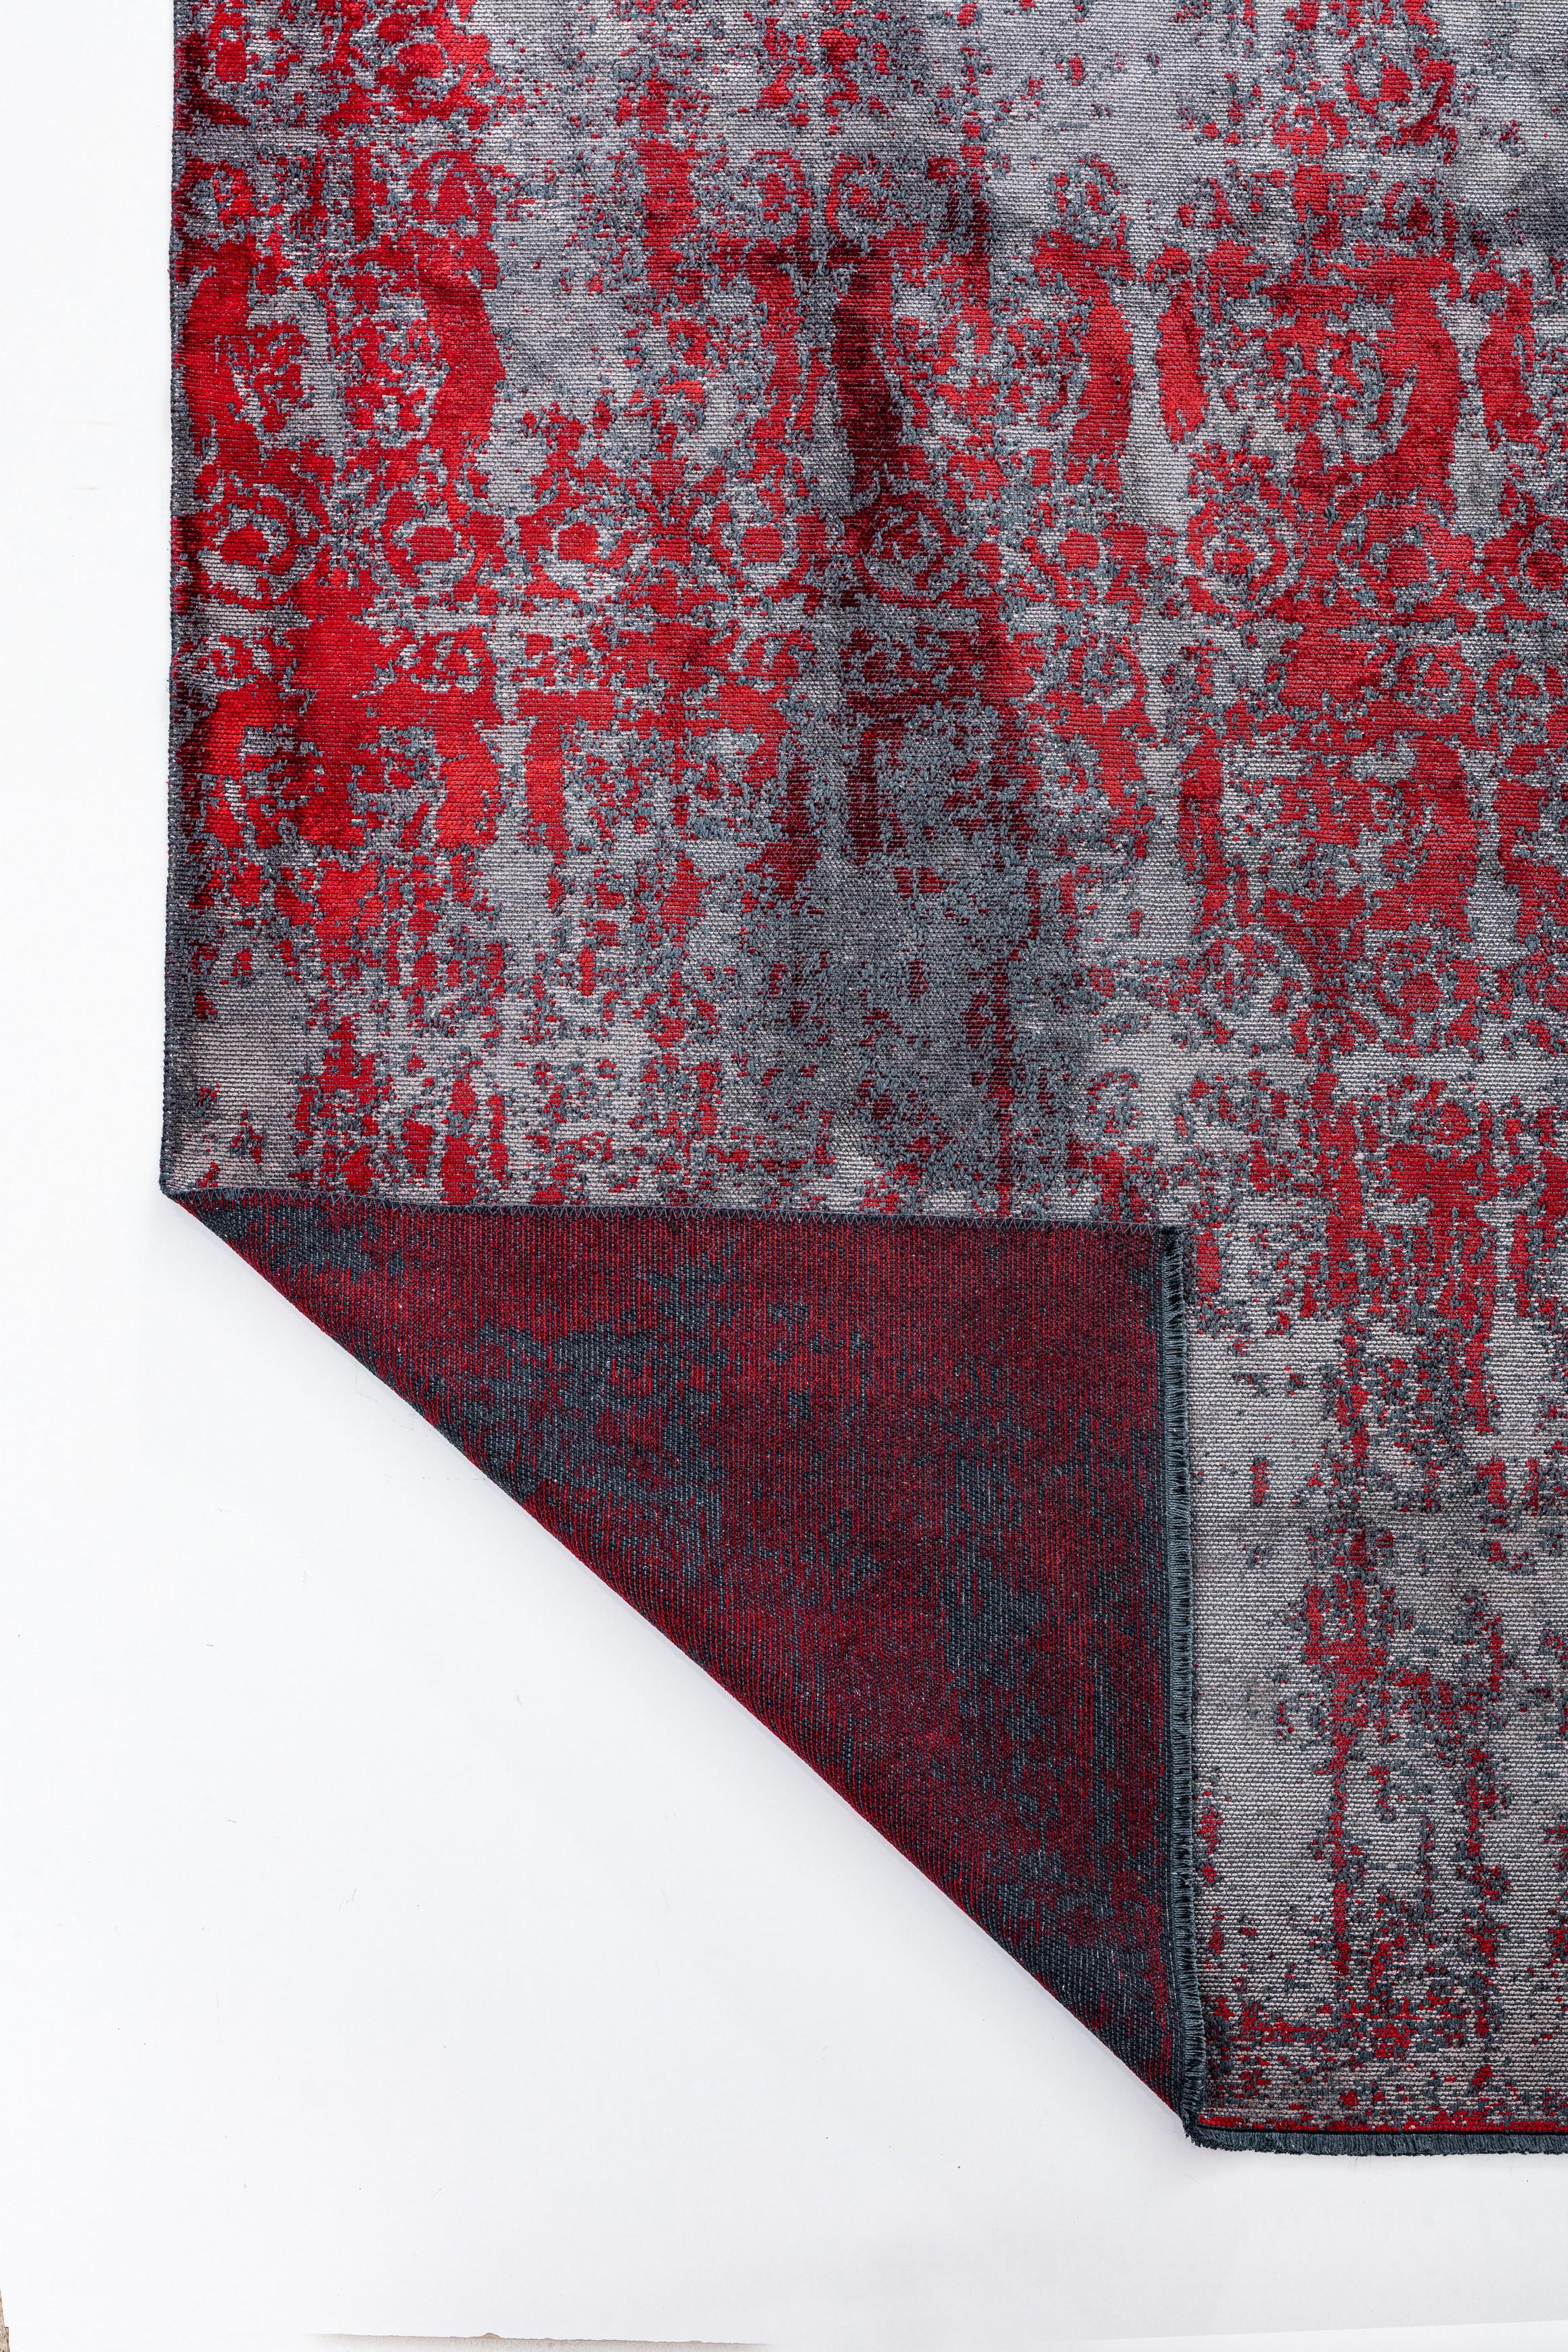 For Sale:  (Red) Contemporary Damask Luxury Hand-Finished Area Rug 3